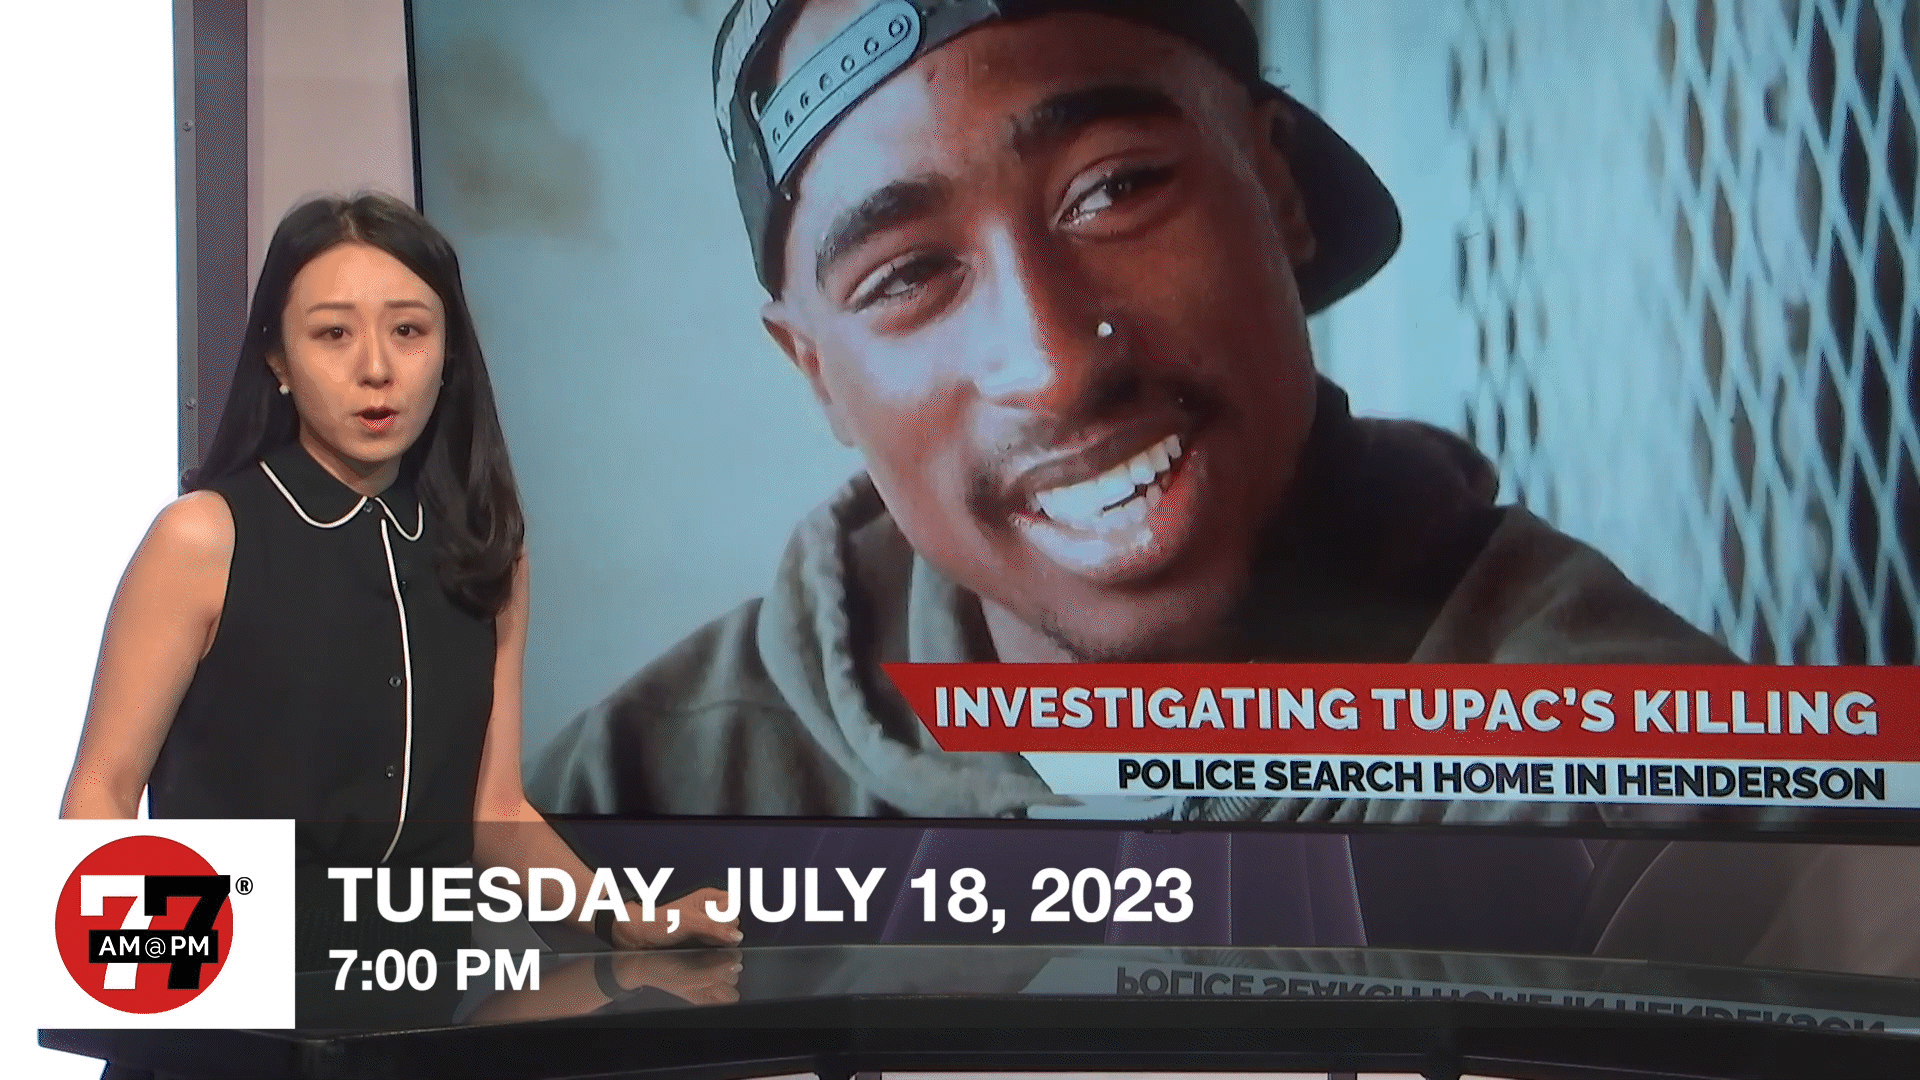 7@7PM for Tuesday, July 18, 2023